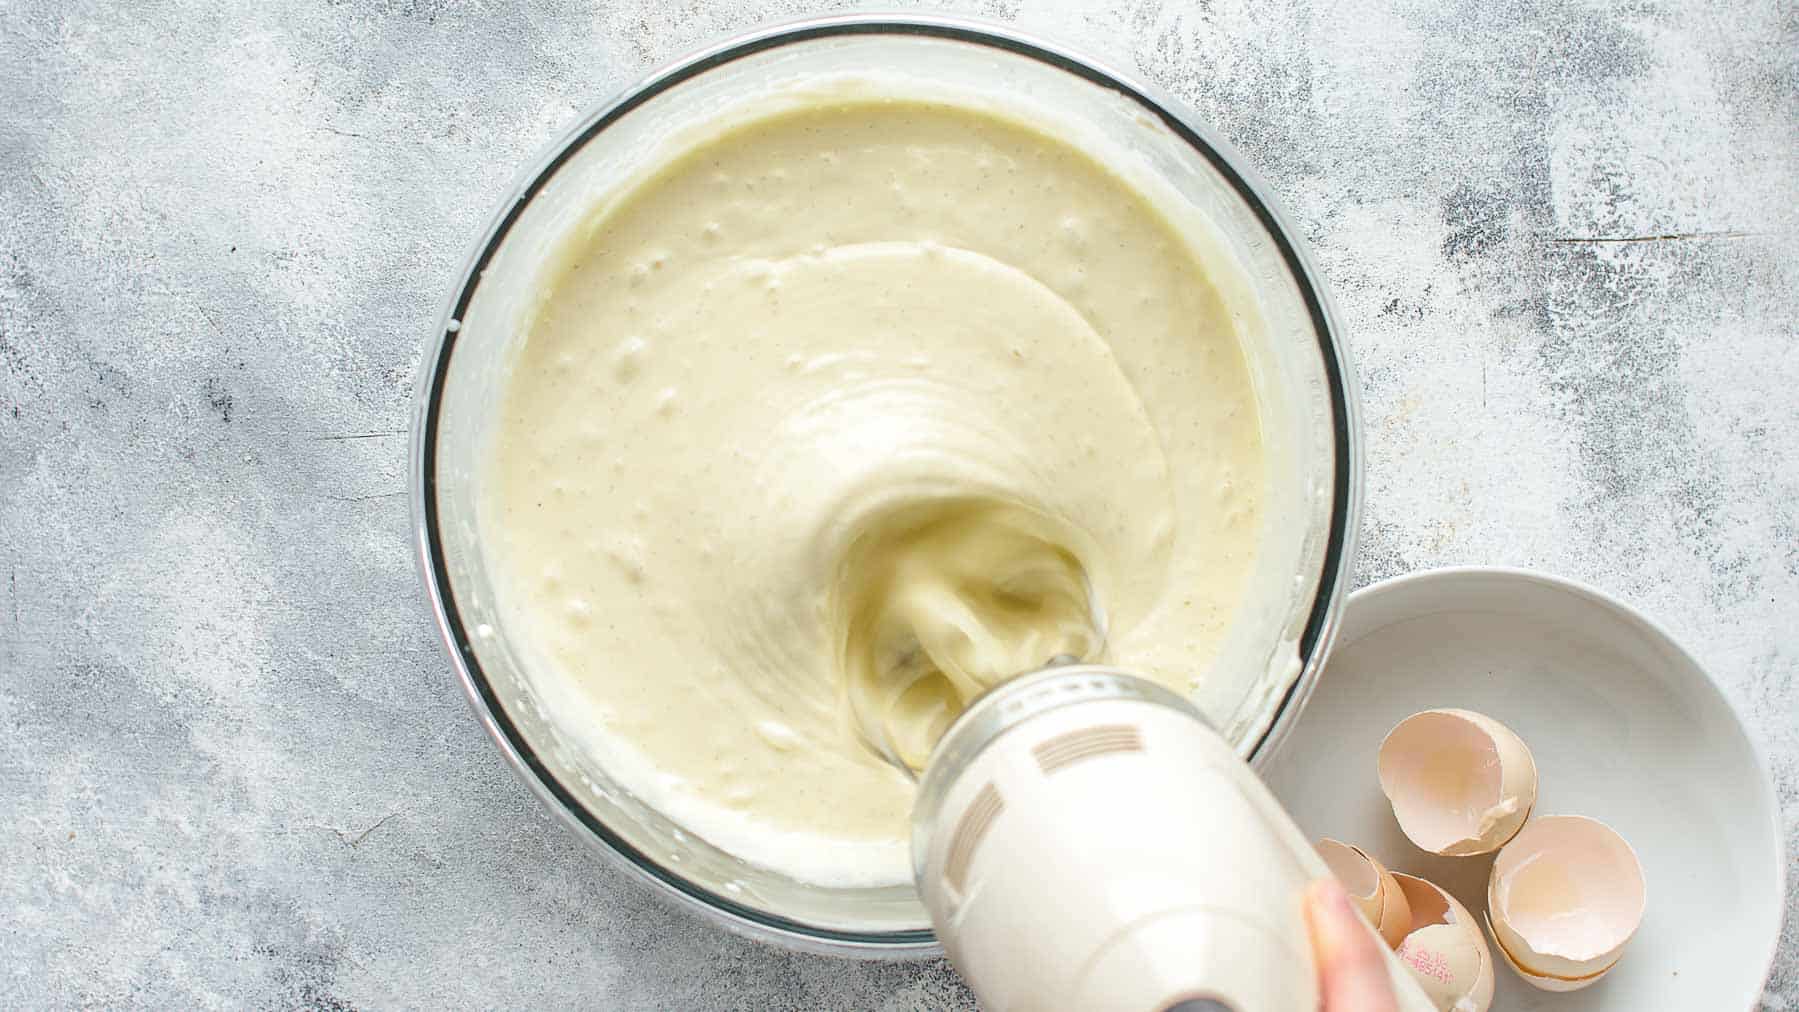 Mixing all coconut cheesecake ingredients in large mixing bowl